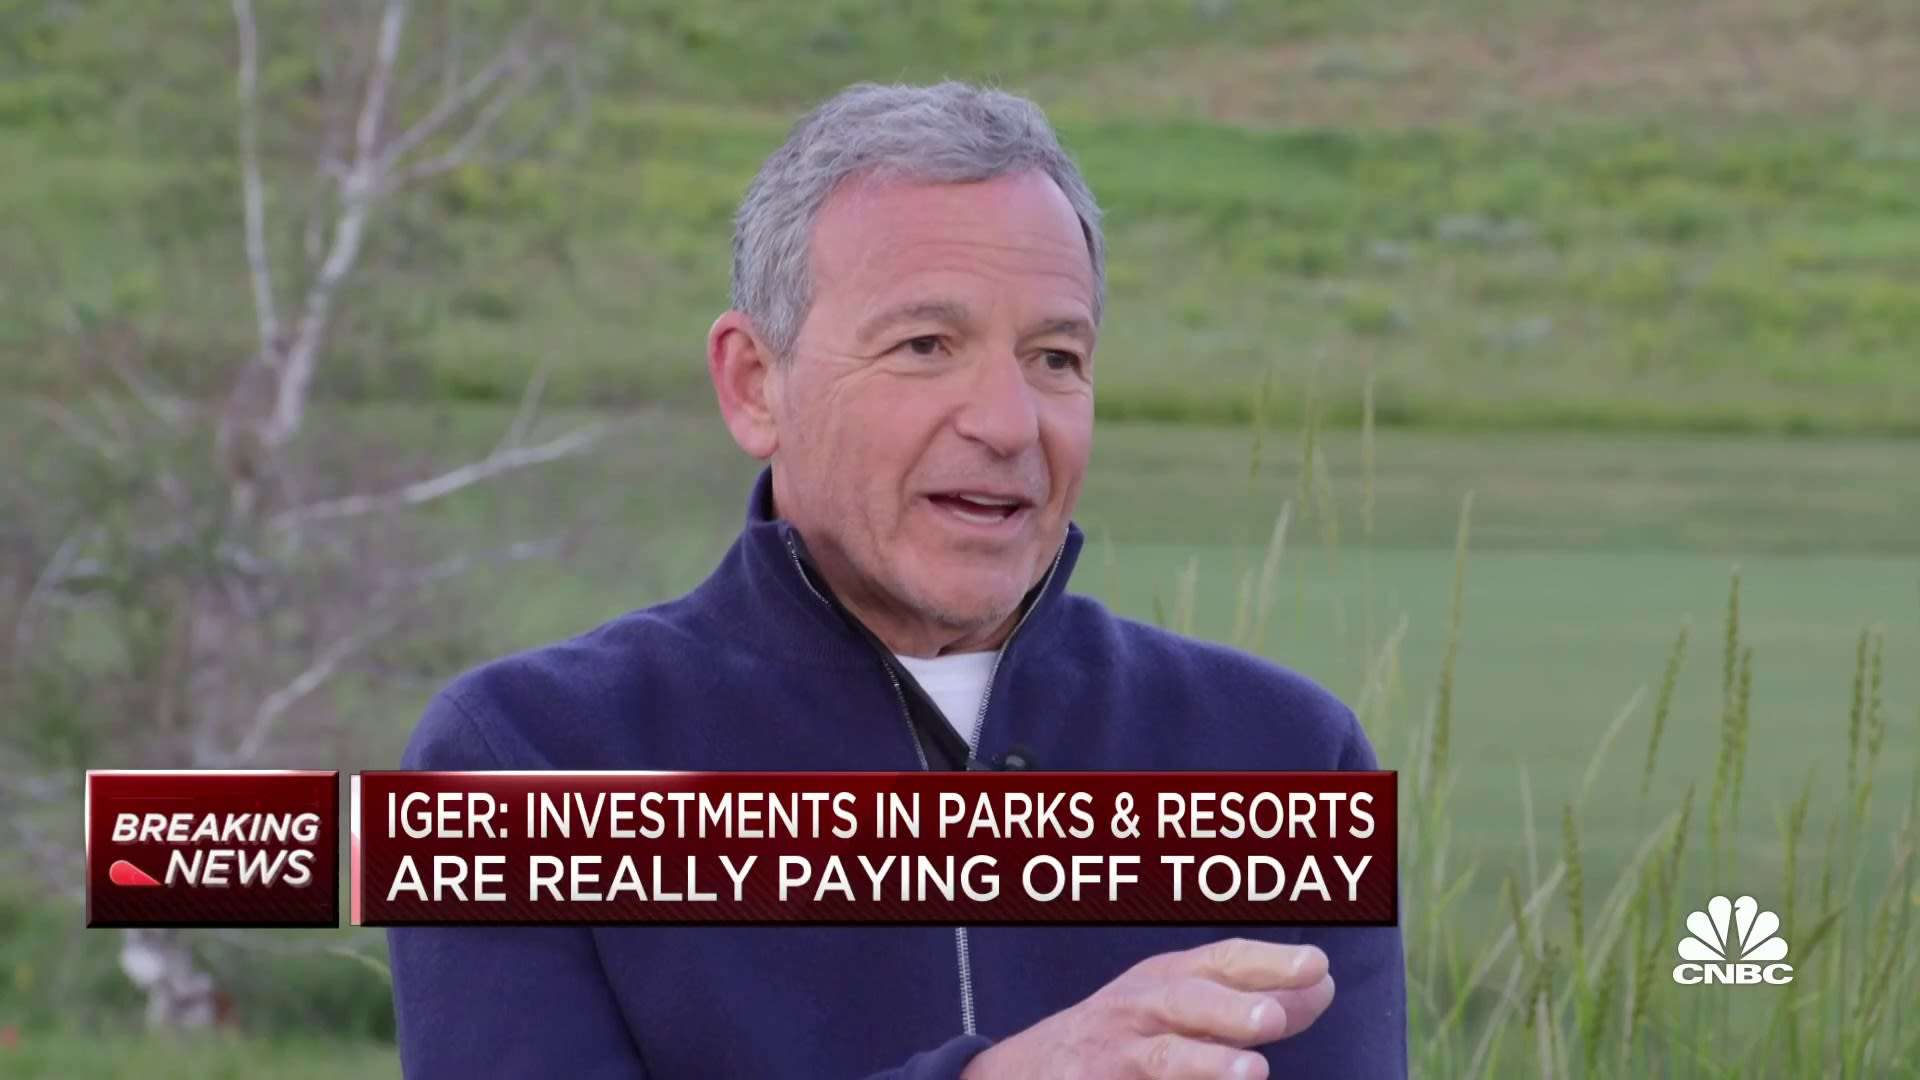 Disney CEO Bob Iger on Marvel and Star Wars: Pulling back to find focus and contain costs